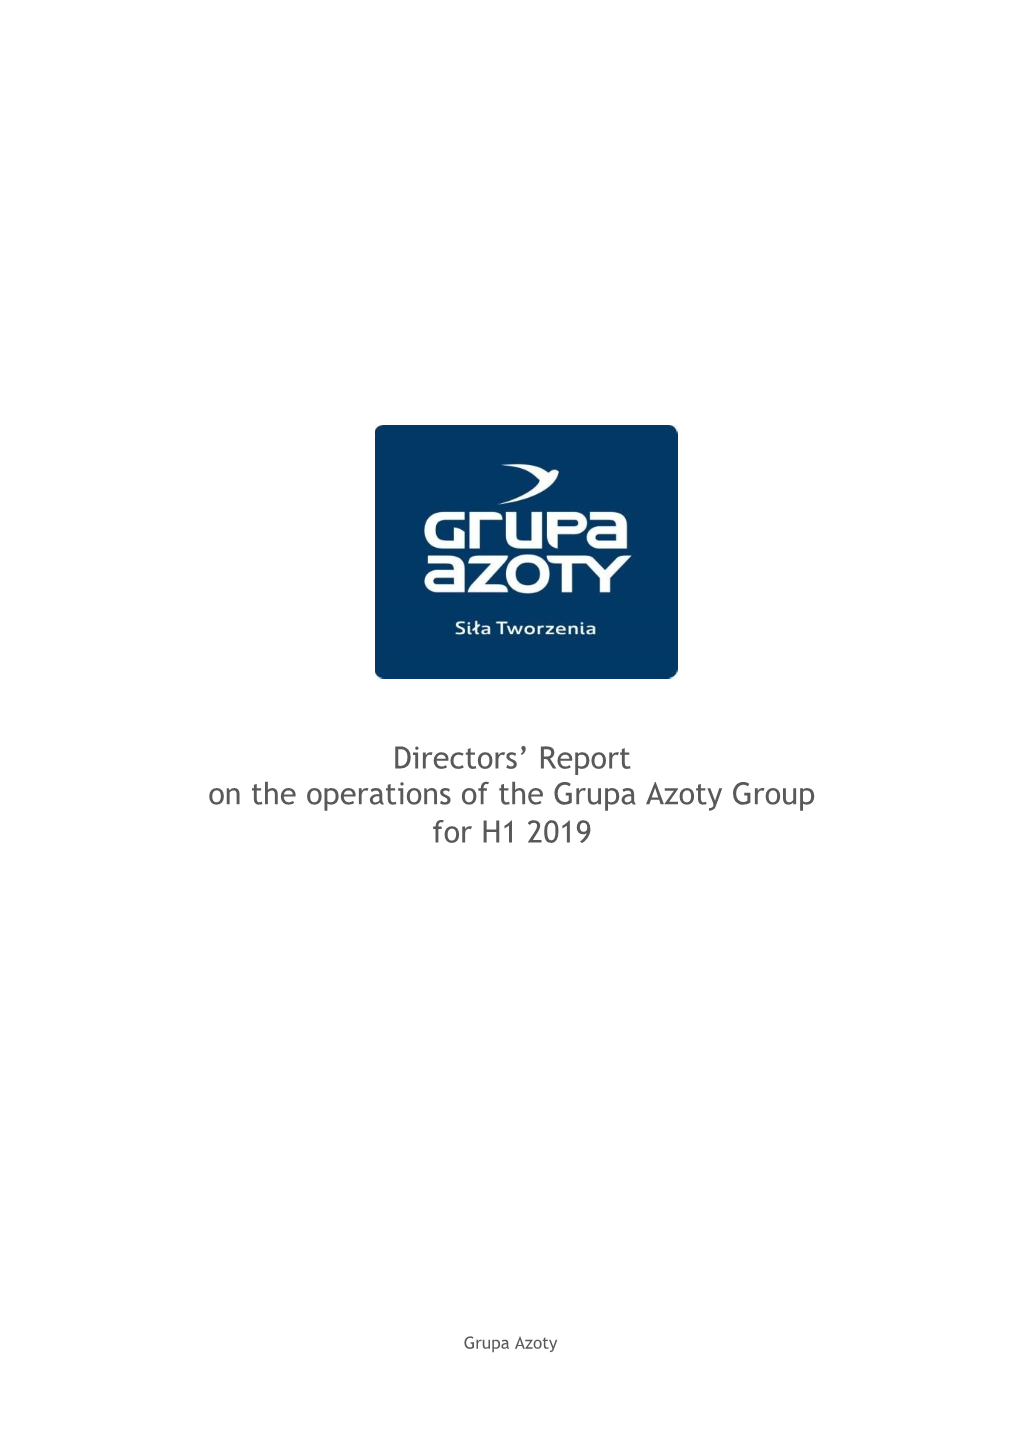 Directors' Report on the Operations of the Grupa Azoty Group in H1 2019 (All Amounts in PLN '000 Unless Indicated Otherwise)